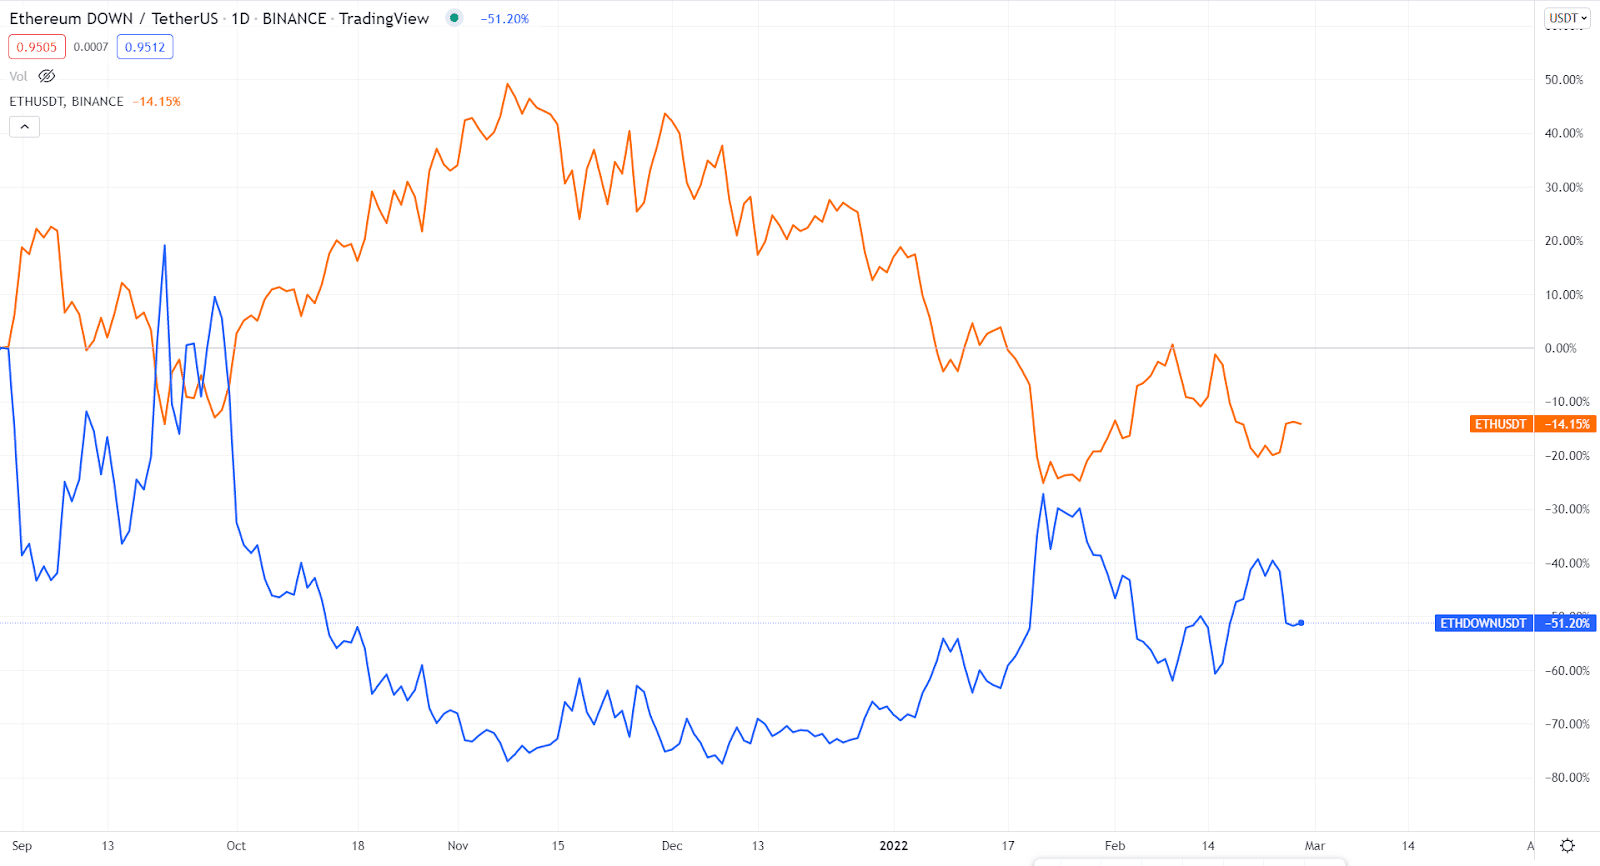 ETHDOWN and ETH/USD pair